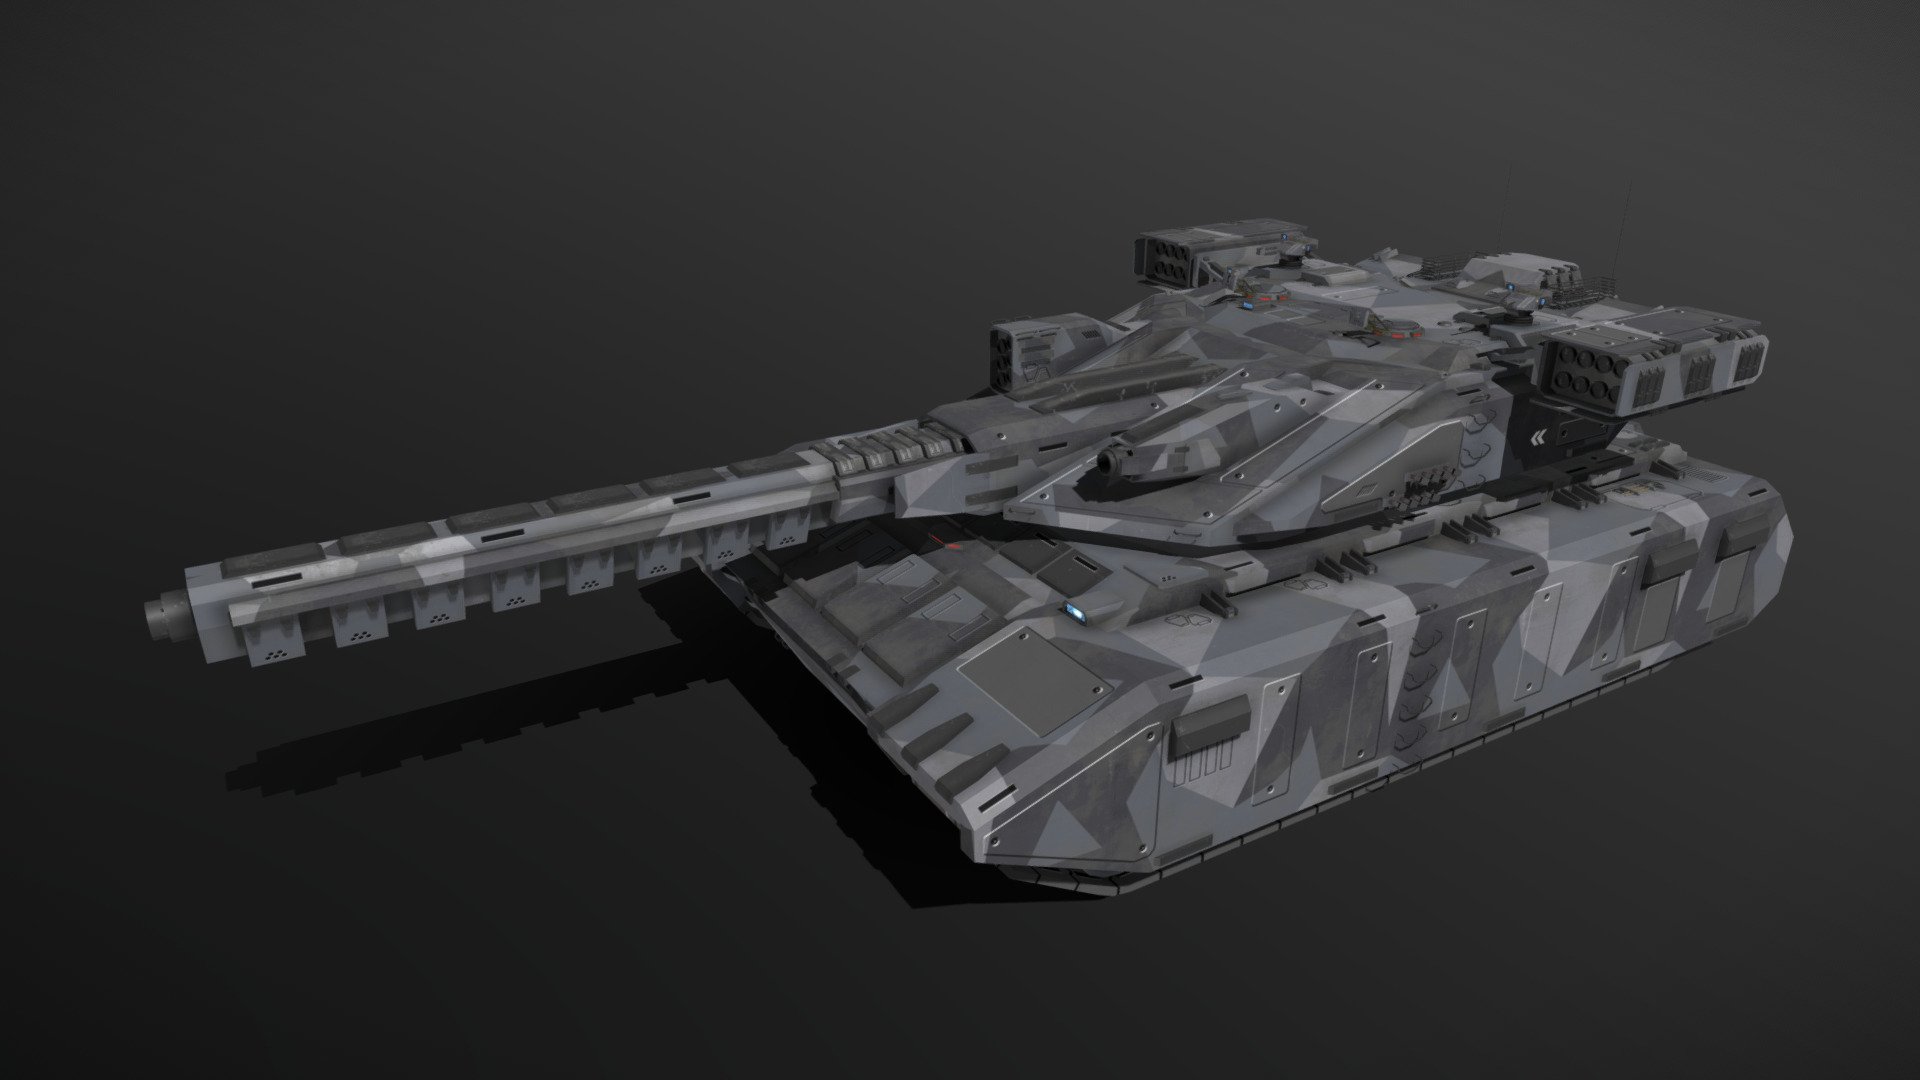 This is a model of a low-poly and game-ready scifi tank. 

The barrel consists of two separate meshes and can be animated with a keyframe animation tool (firing animation). The turret can rotate left/right, the gun can rotate up/down. The track movement can be animated with UV offset.

The model comes with several differently colored texture sets. The PSD file with intact layers is included too.

Please note: The textures in the Sketchfab viewer have a reduced resolution to improve Sketchfab loading speed.

If you have bought this model please make sure to download the “additional file”.  It contains FBX and OBJ meshes, full resolution textures and the source PSDs with intact layers. The meshes are separate and can be animated (e.g. firing animations for gun barrels, rotating turrets, etc - Scifi Overlord Siege Tank - Buy Royalty Free 3D model by MSGDI 3d model